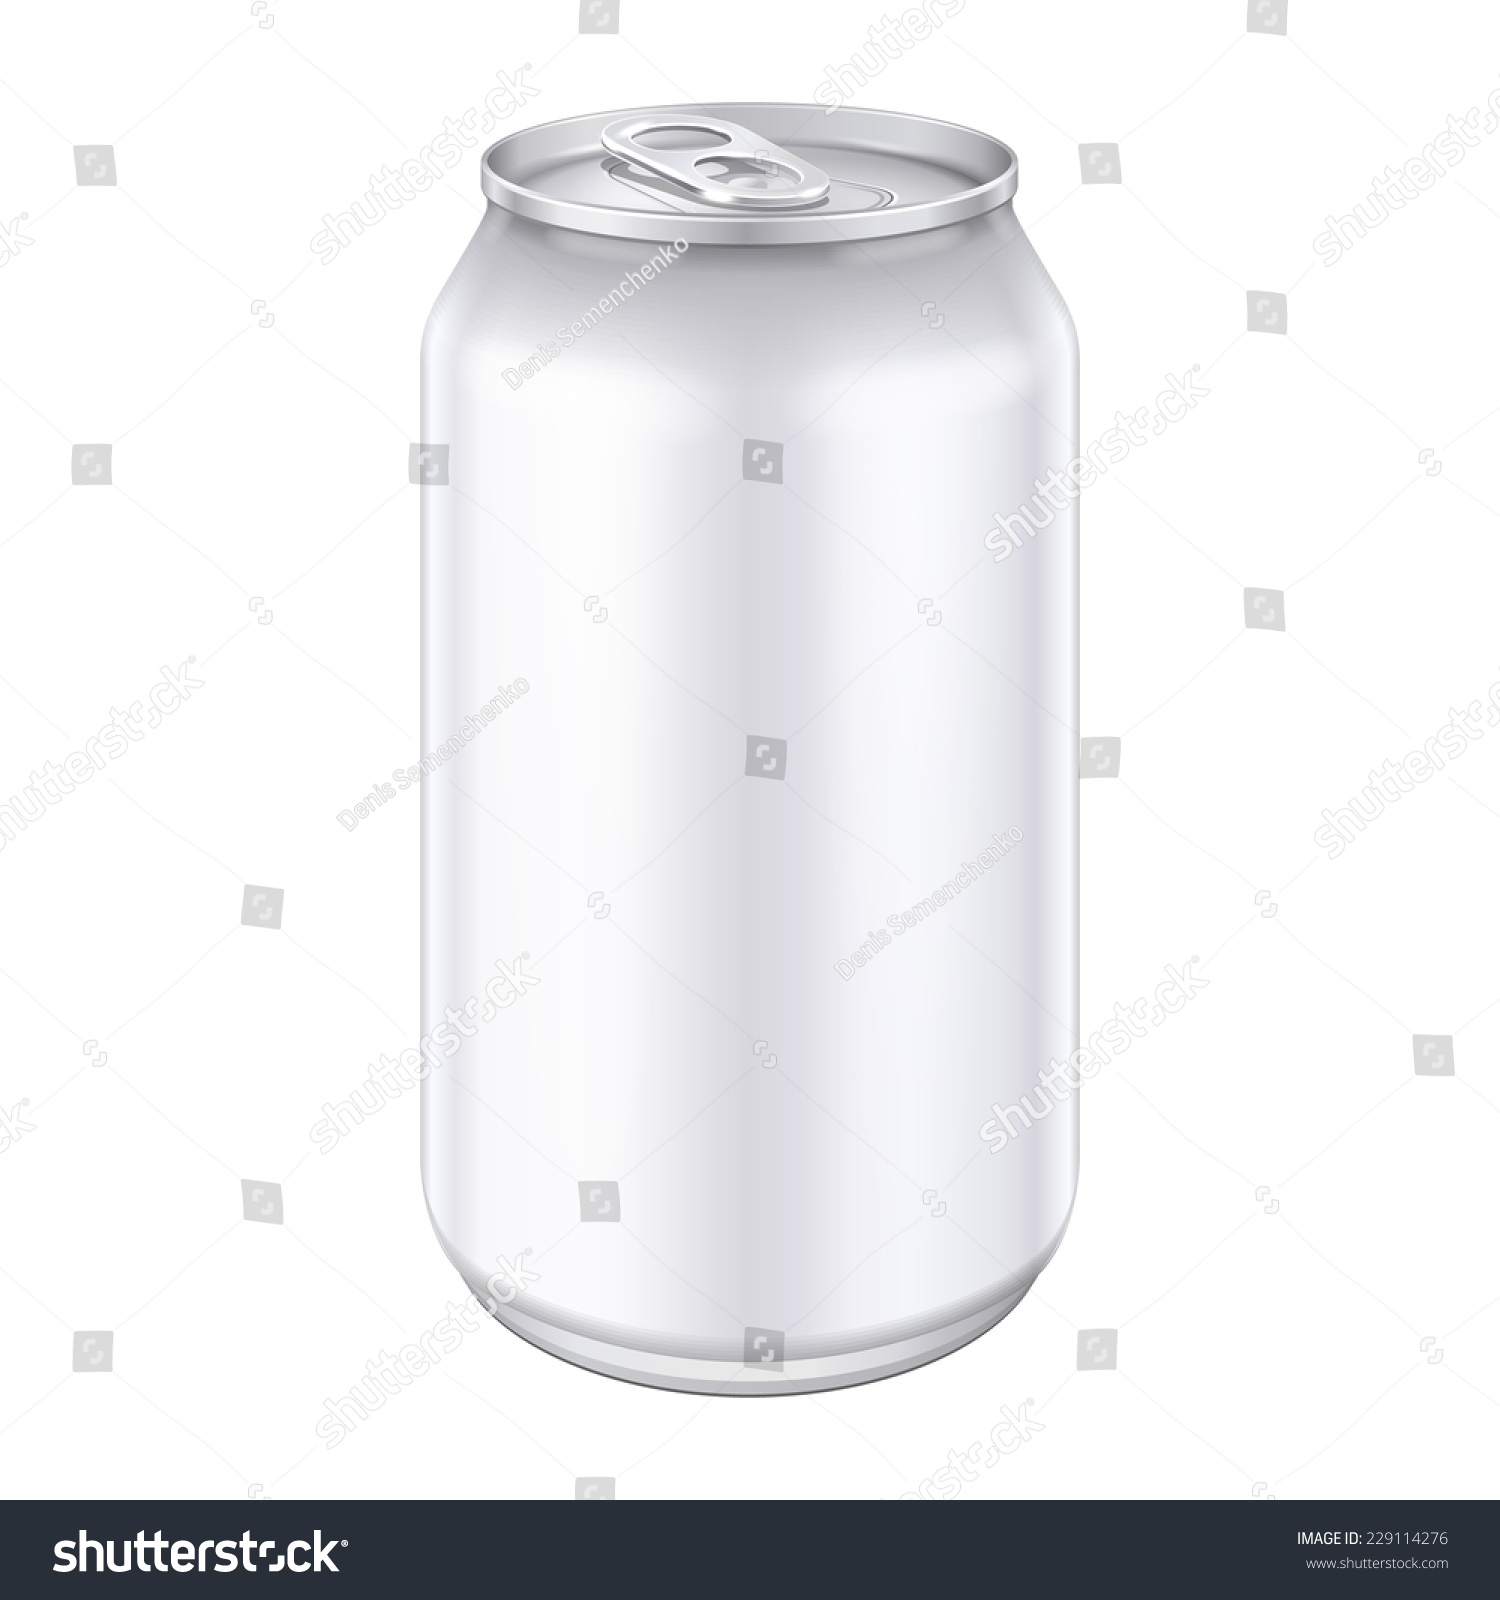 SVG of White Metal Aluminum Beverage Drink Can 330ml, 500ml. Mockup Template Ready For Your Design. Isolated On White Background. Product Packing. Vector EPS10 Product Packing Vector EPS10 svg